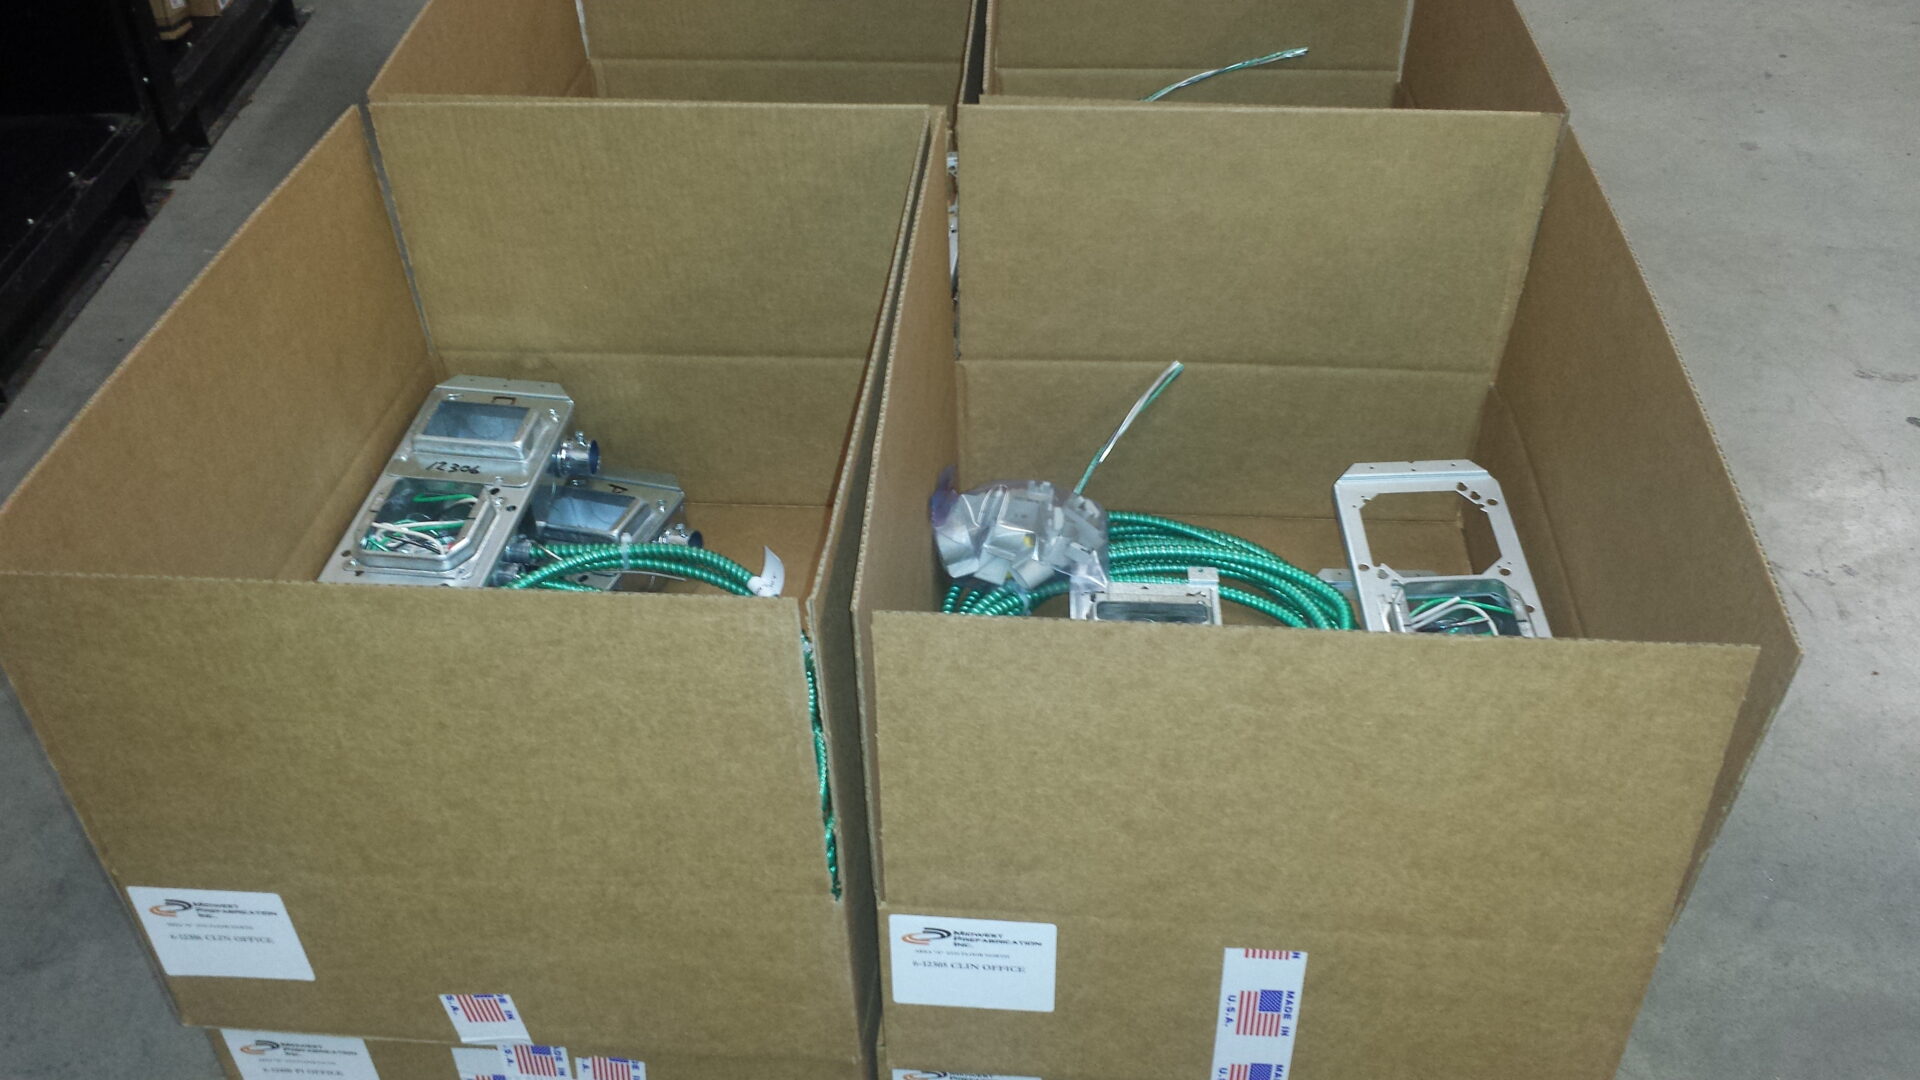 Electrical components in boxes